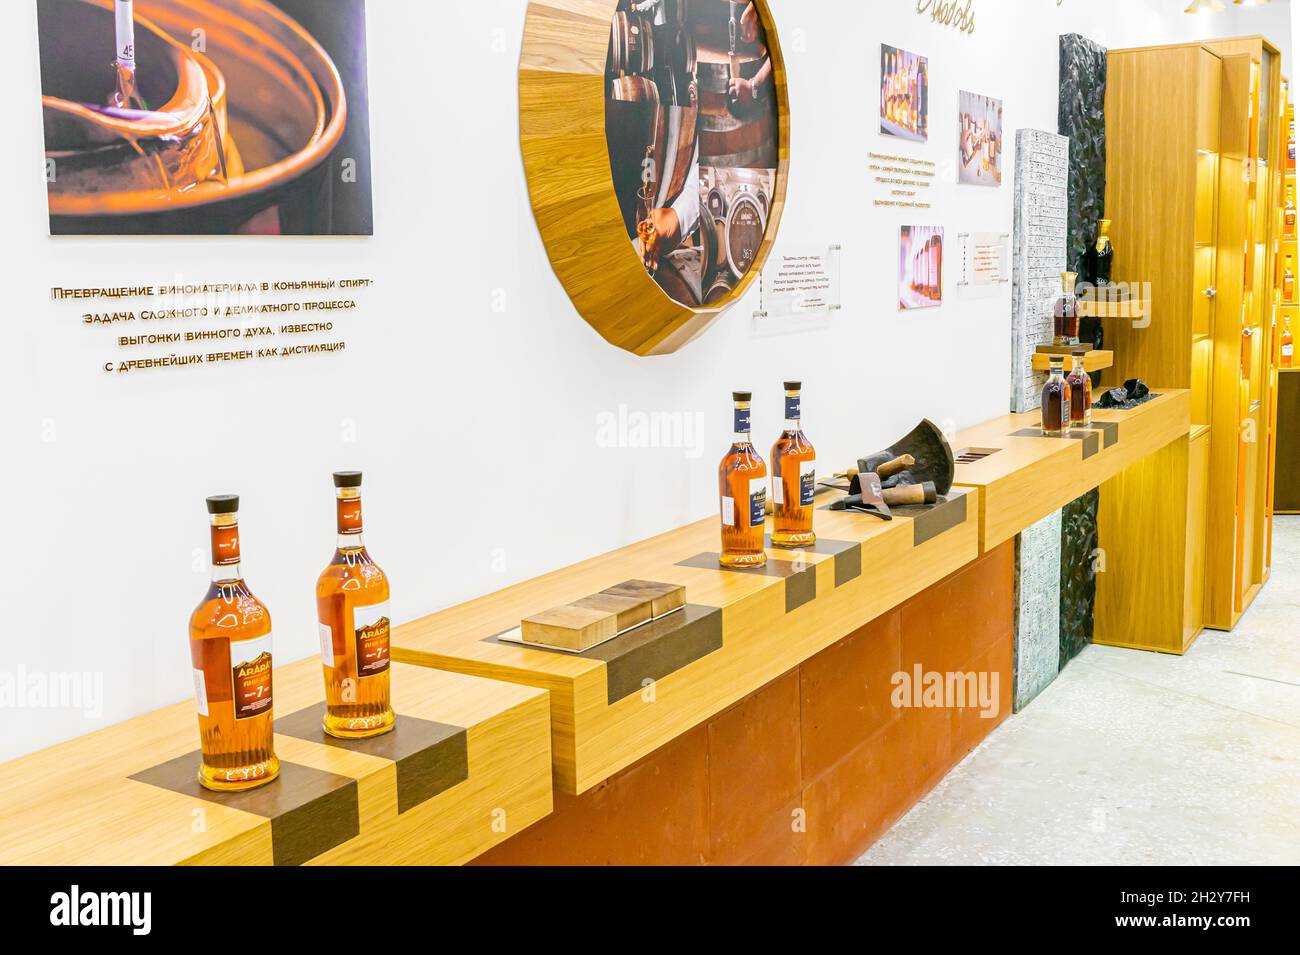 Ararat brandy display in Armenia pavillion in VDNKH, Moscow, Russia. The exhibition is showing full production cycle of signature Armenian brandy. Stock Photo